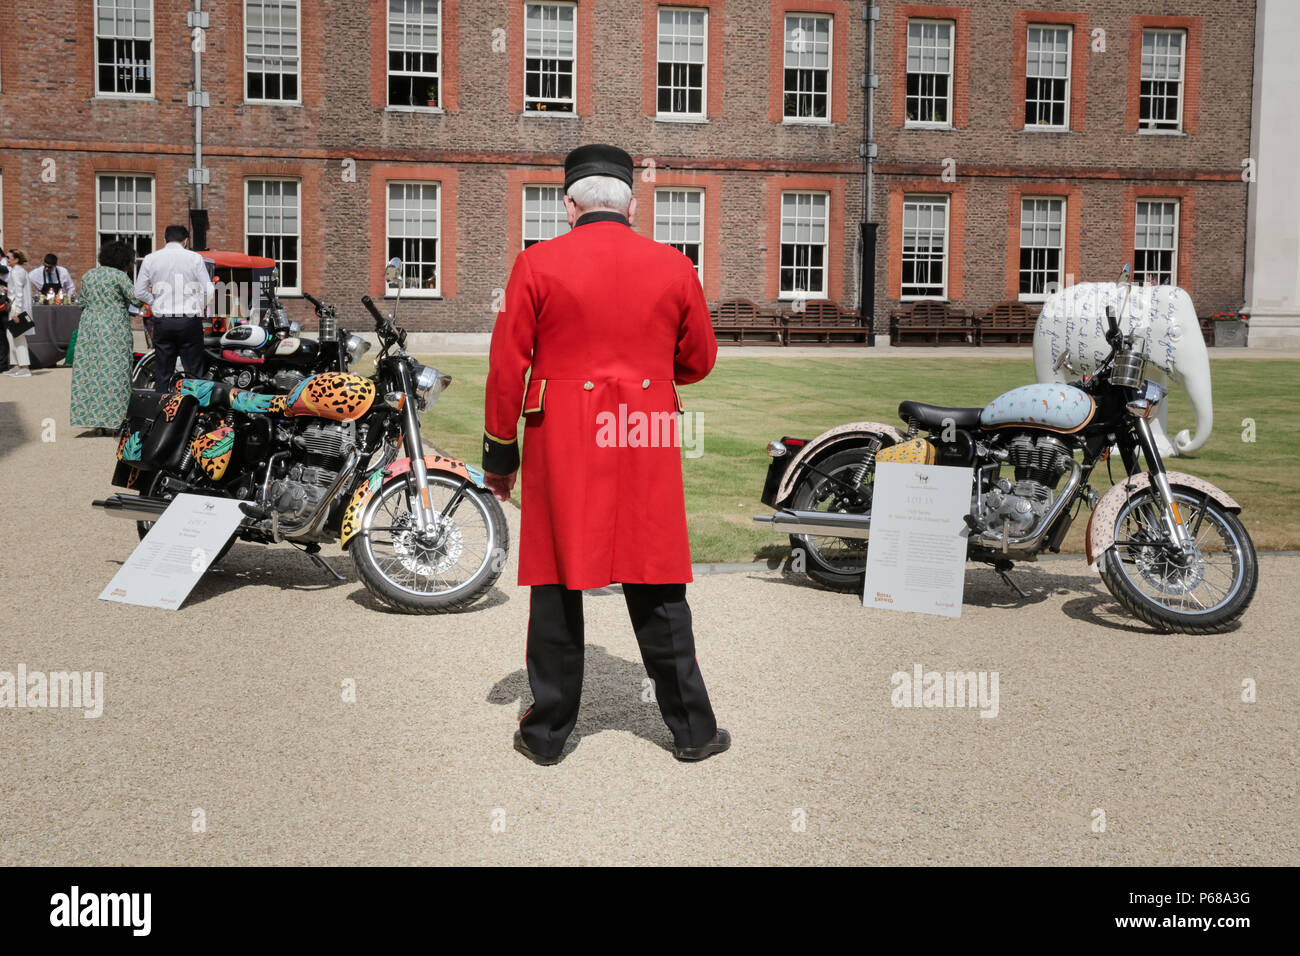 London, UK. 28th June, 2018. Judging of the dazzling Concours d’éléphant fleet of customised vehicles led by HRH Prince Michael of Kent at the Royal Hospital Chelsea.  Credit: amanda rose/Alamy Live News Stock Photo